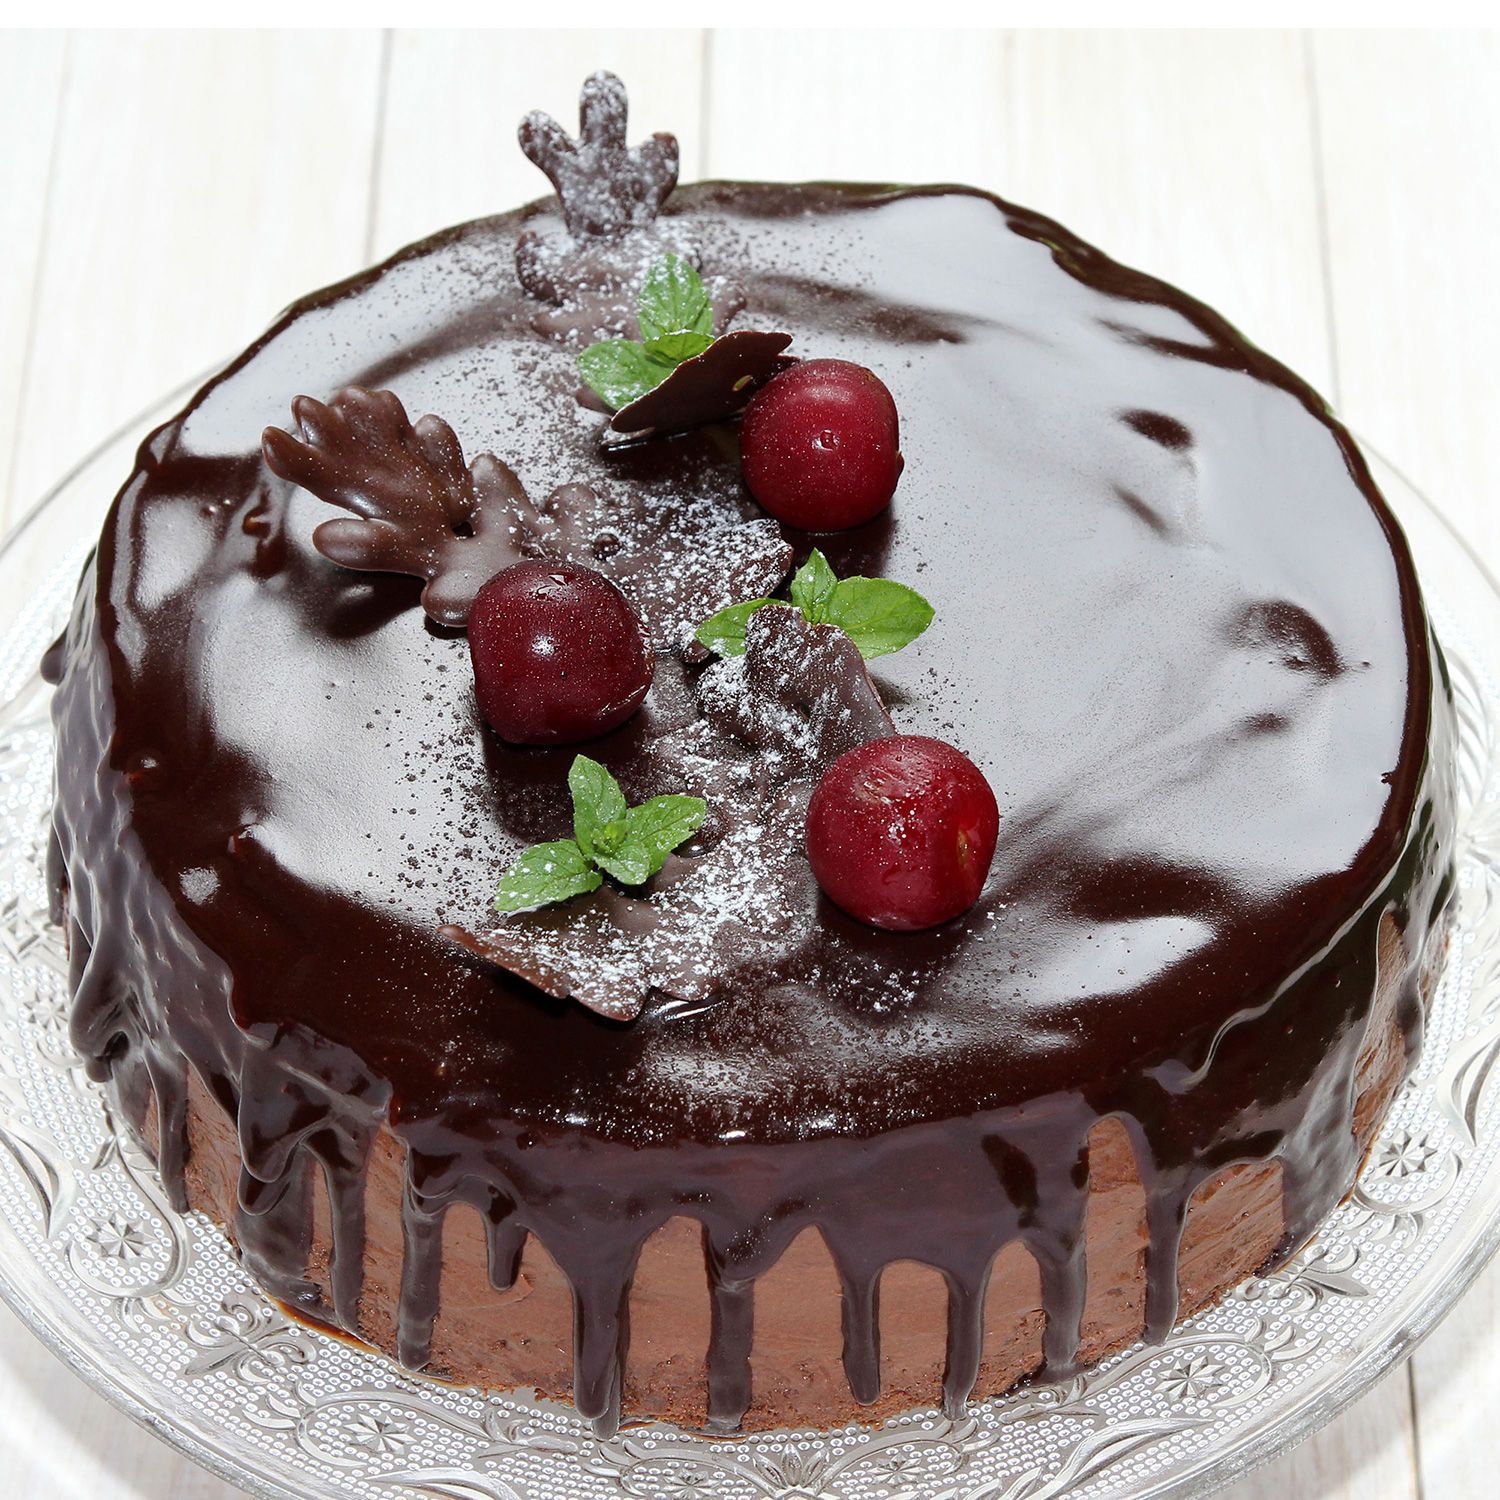 Buy Tgb Bakery Black Forest Cake 500 Gm Online at the Best Price of Rs null  - bigbasket